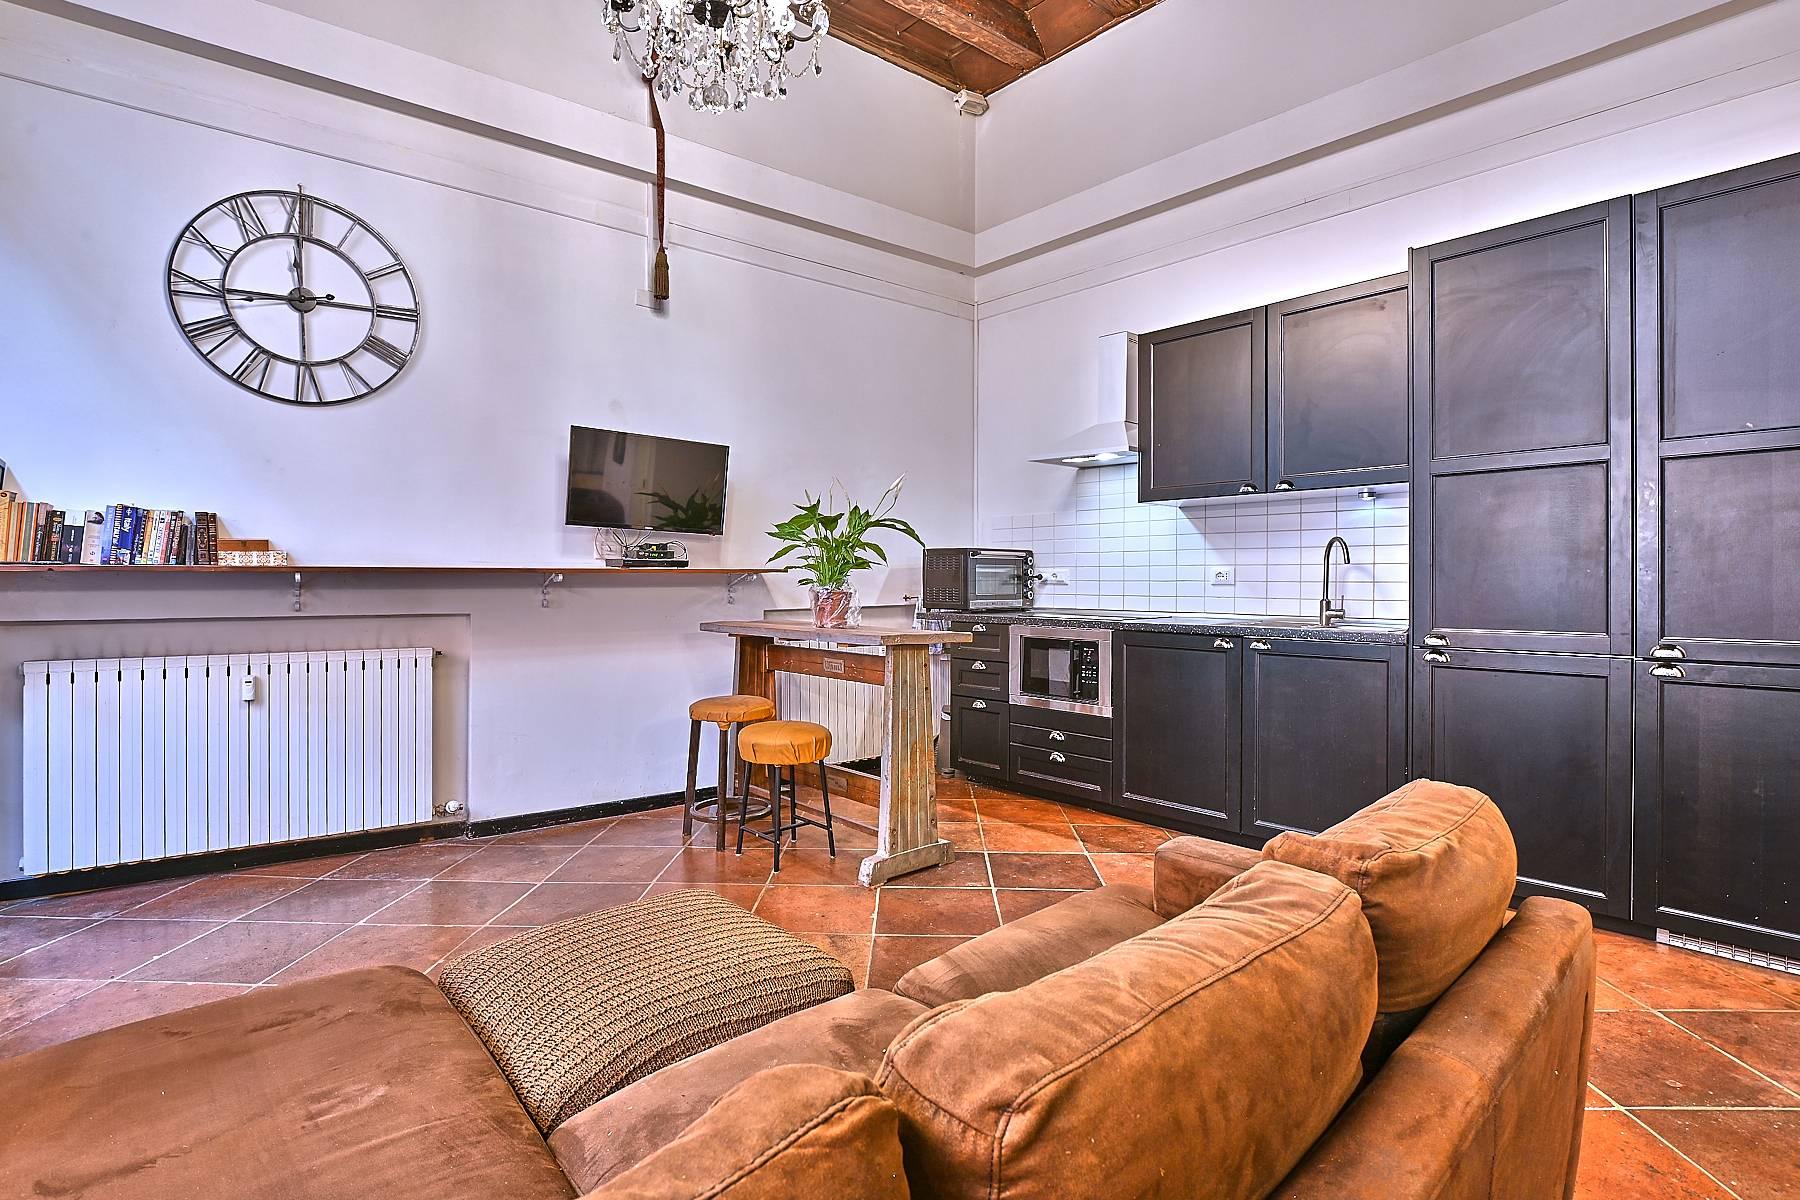 Apartment in a sixteenth-century building - 5